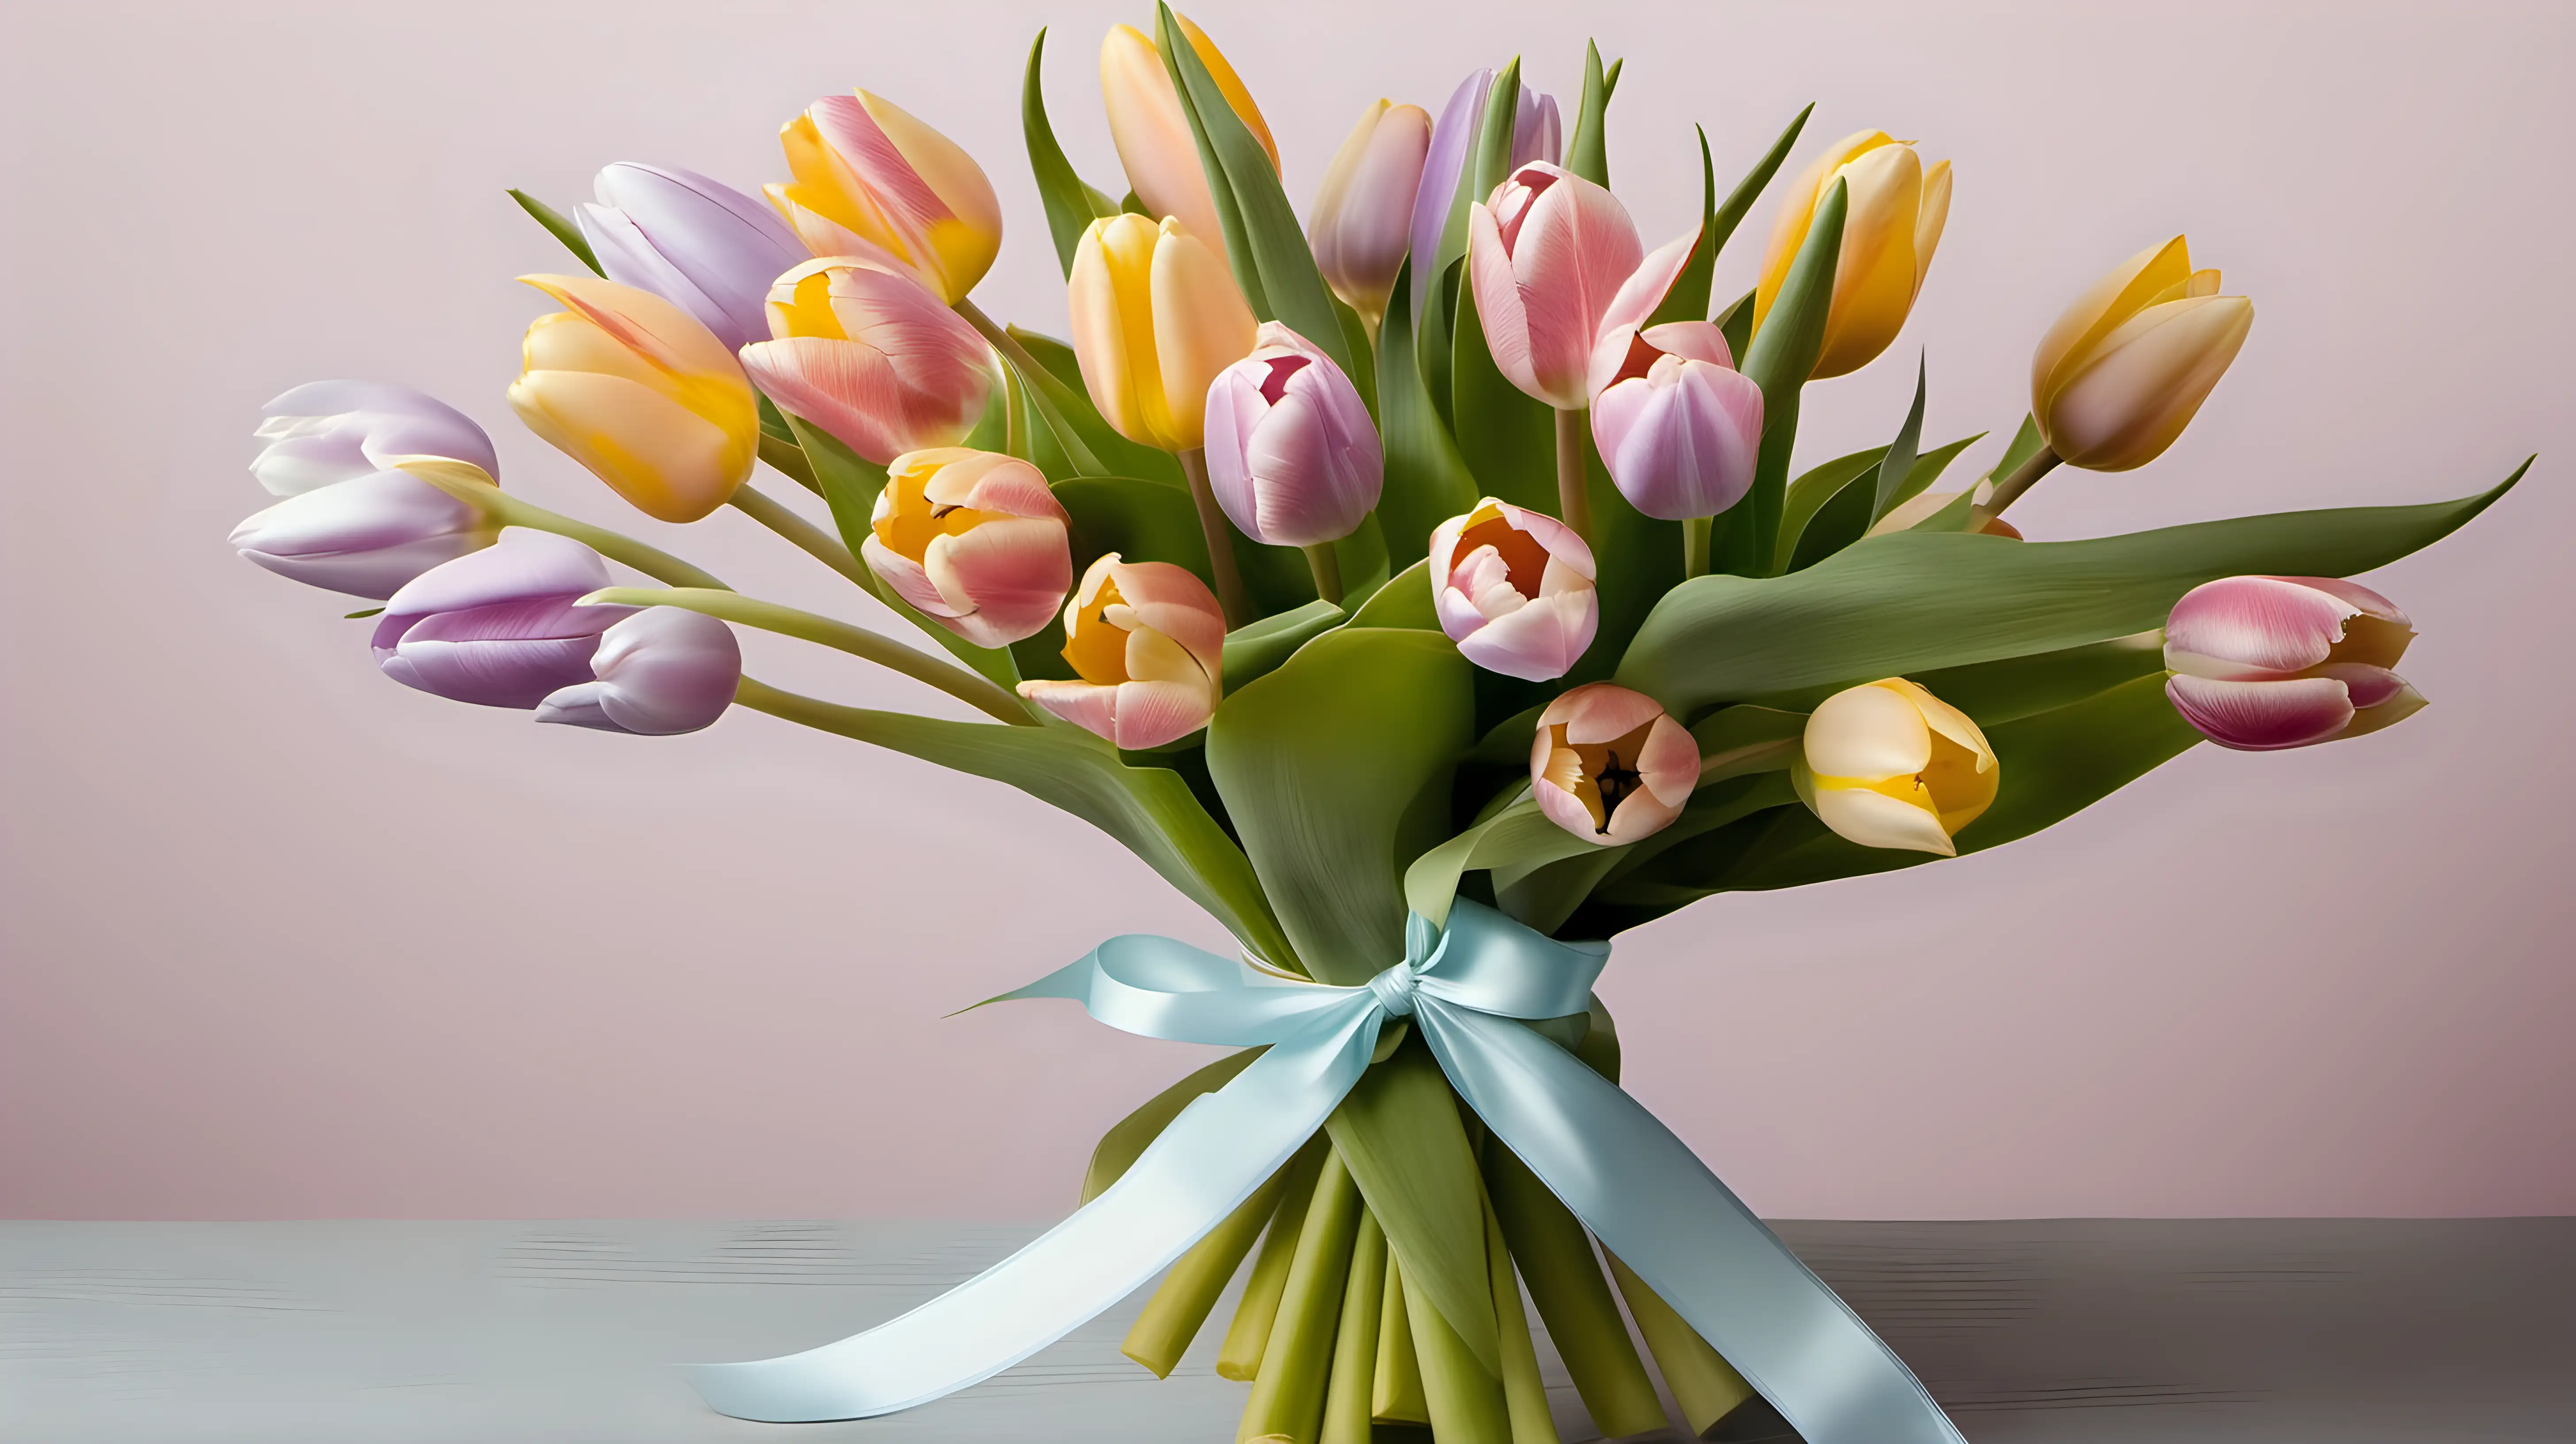 Romantic Bouquet of PastelColored Tulips with Delicate Ribbon